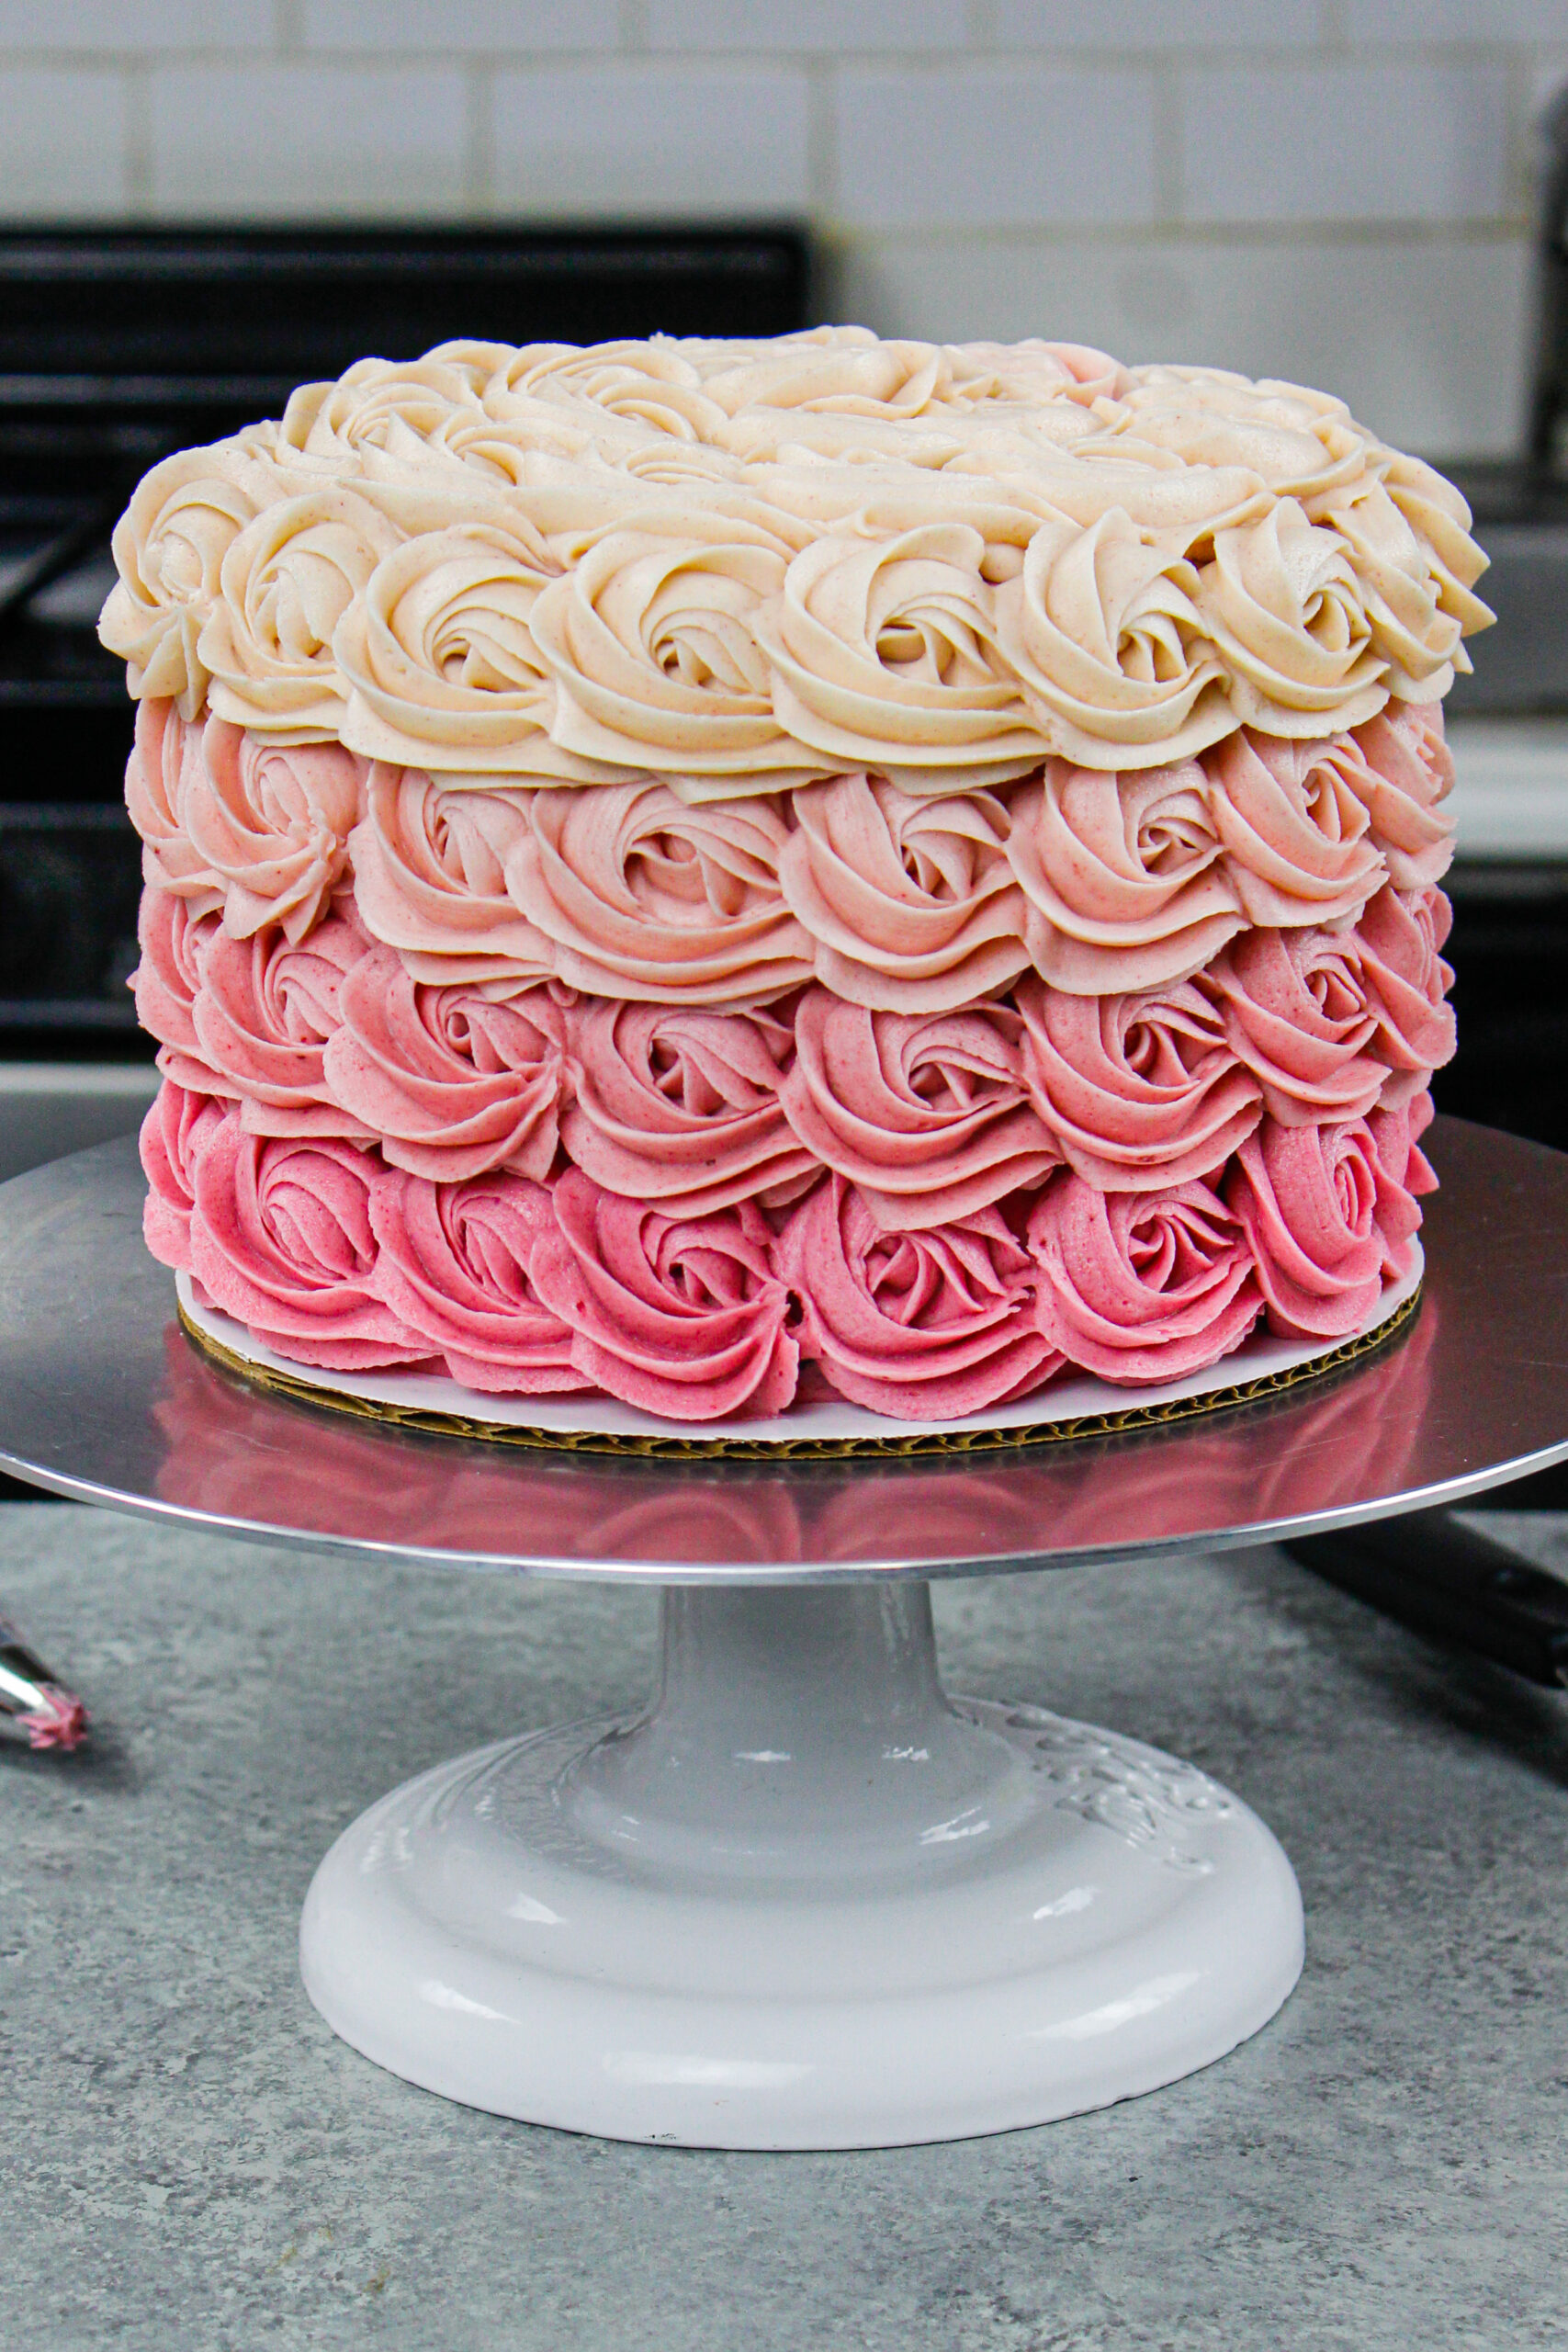 image of a gorgeous pink ombre rosette cake made with a wilton 1m open star frosting tip